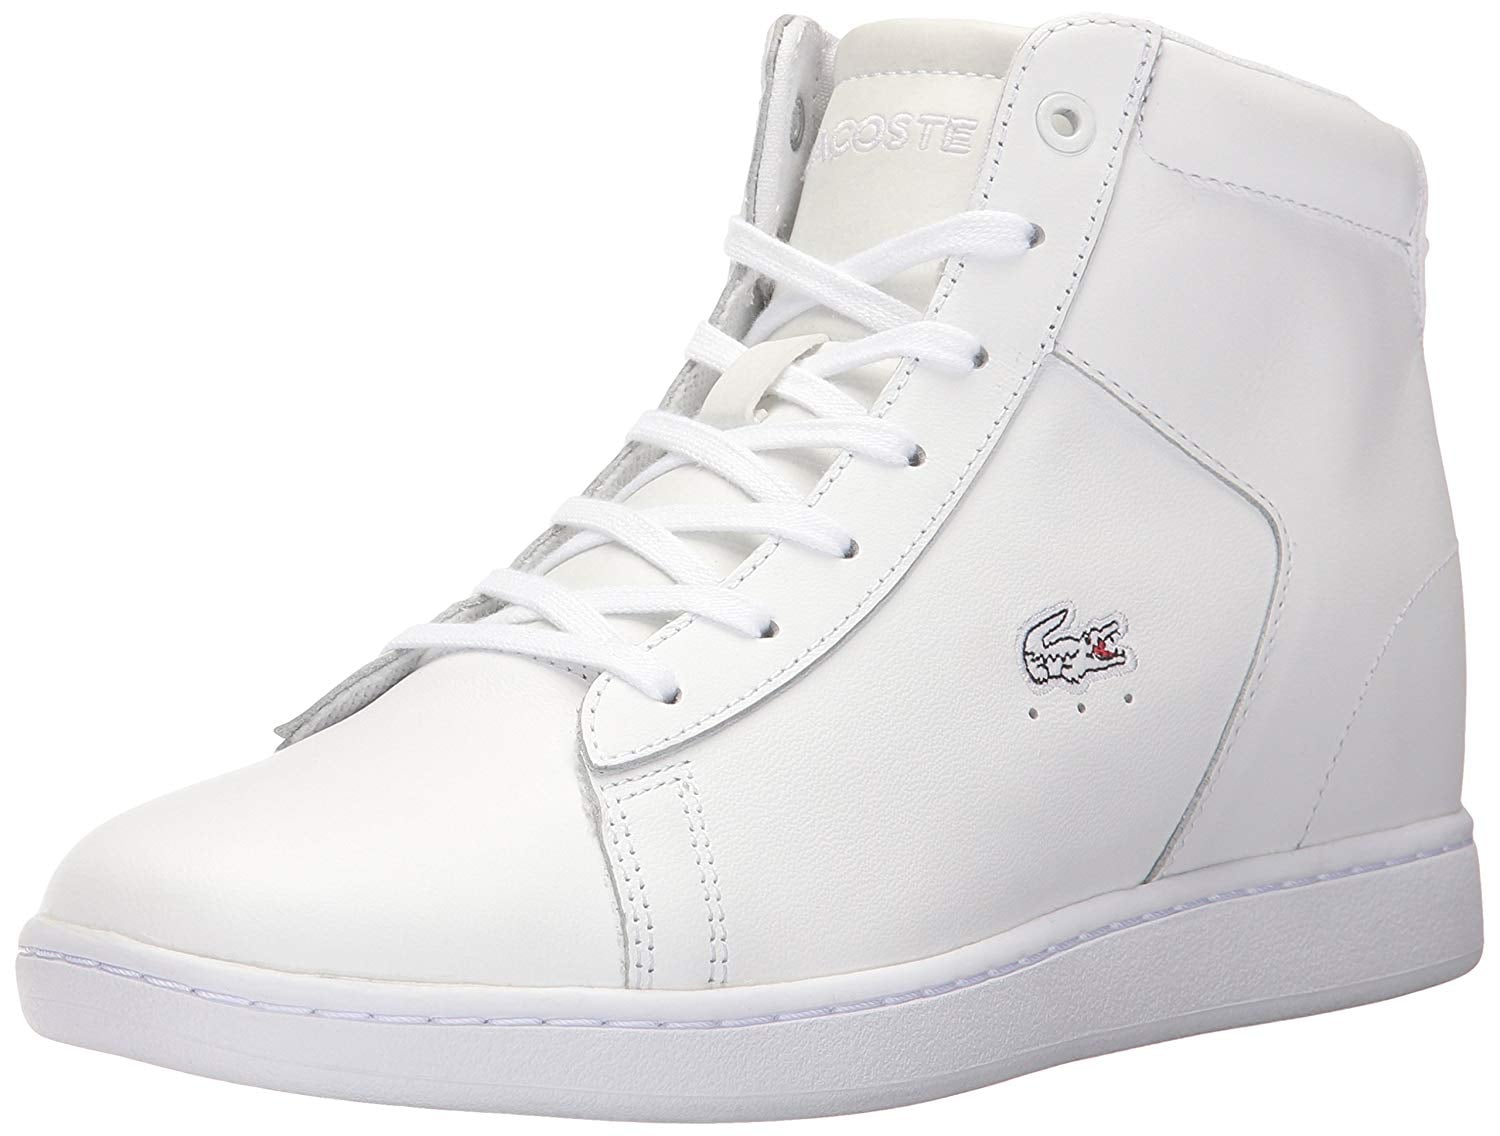 White Leather Sneakers July 